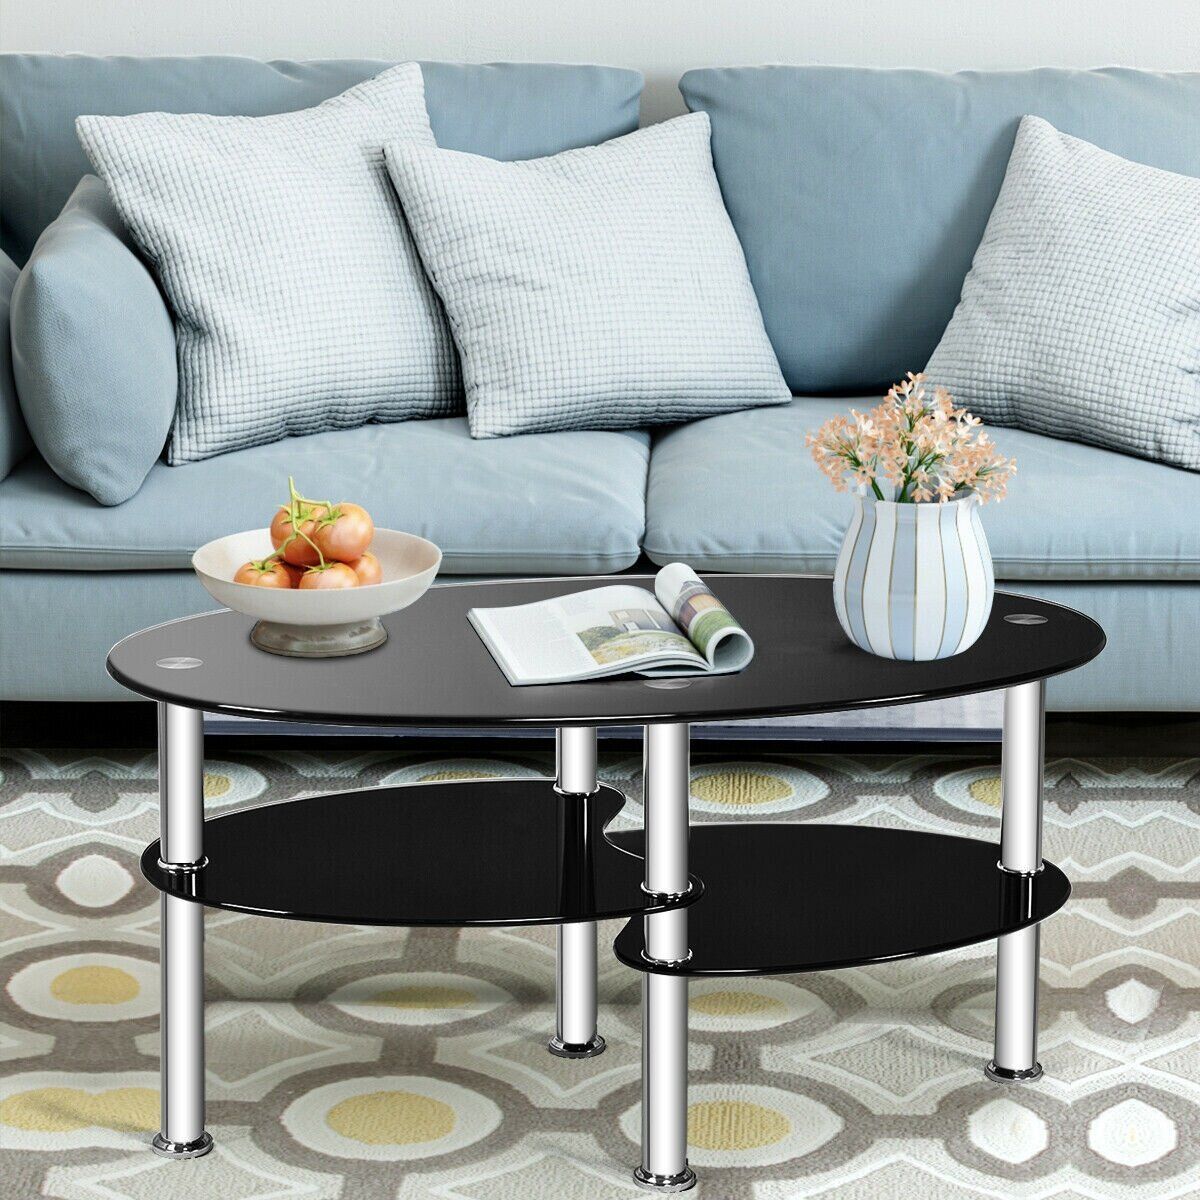 Ivy Bronx Oval Tempered Glass Side Coffee Table | Wayfair Intended For Tempered Glass Oval Side Tables (View 7 of 15)